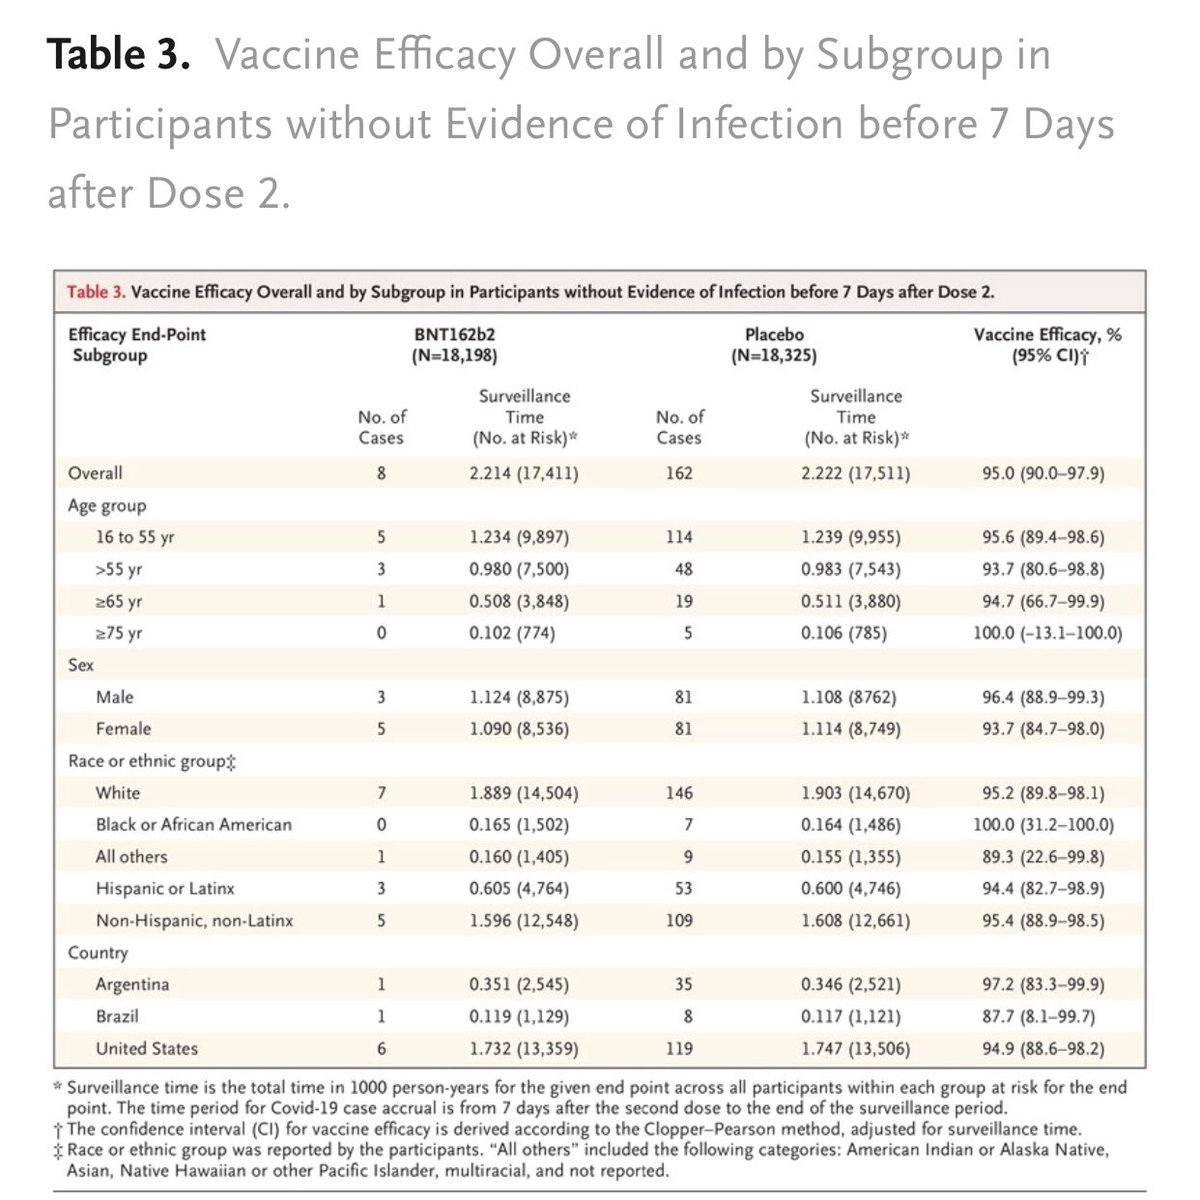 2) How is the vaccine efficacy across age, gender, race, and country subgroups? Very similar!